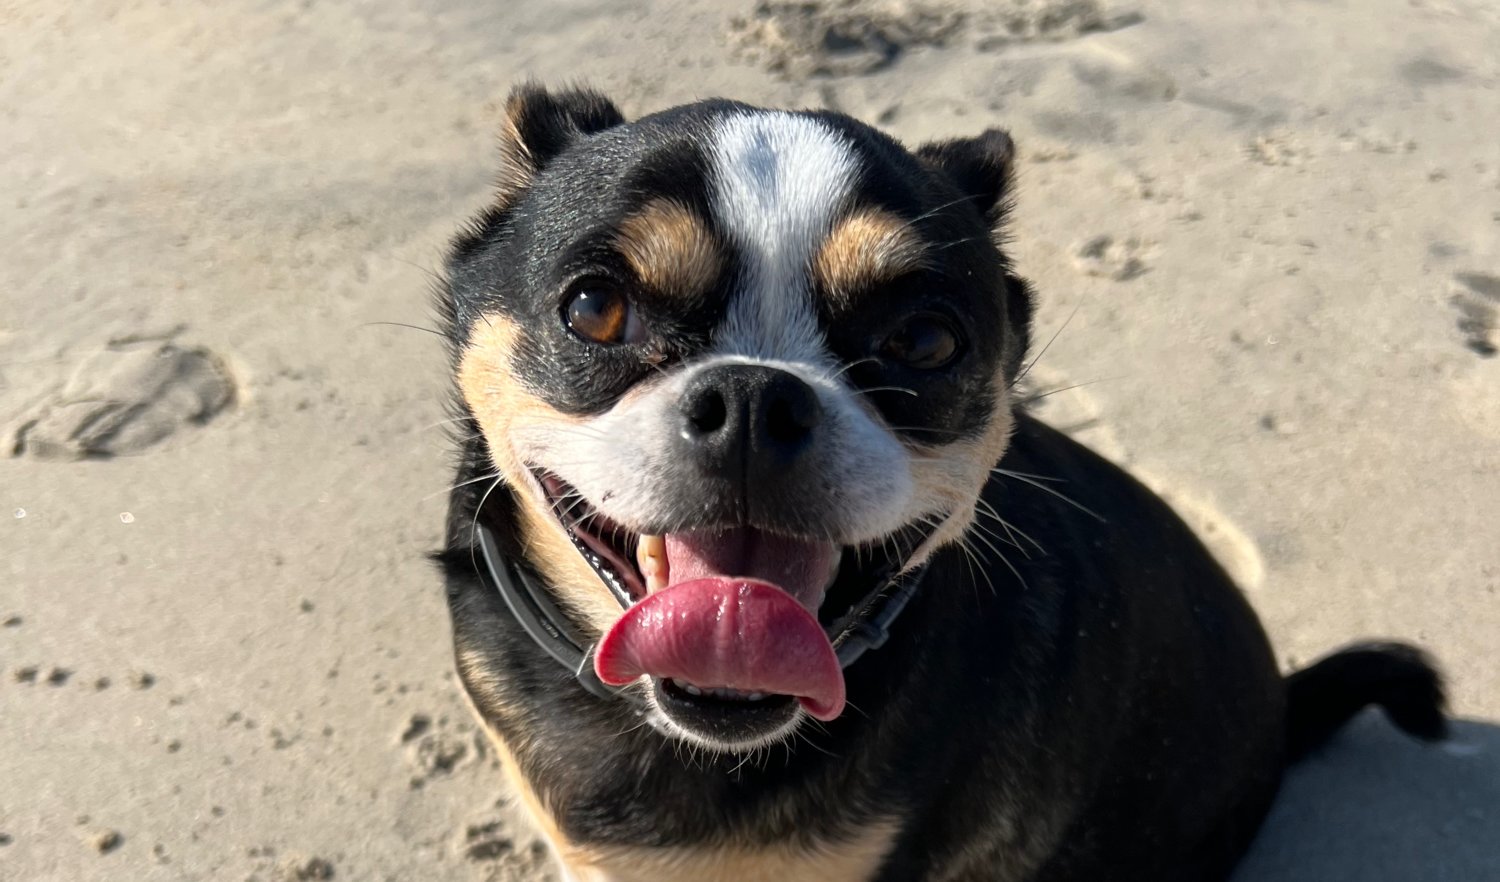 Harley Quinn, a six-year-old chihuahua, recently lost an eye in a tragic incident in February, and her mom is looking for help with vet bills as a result.